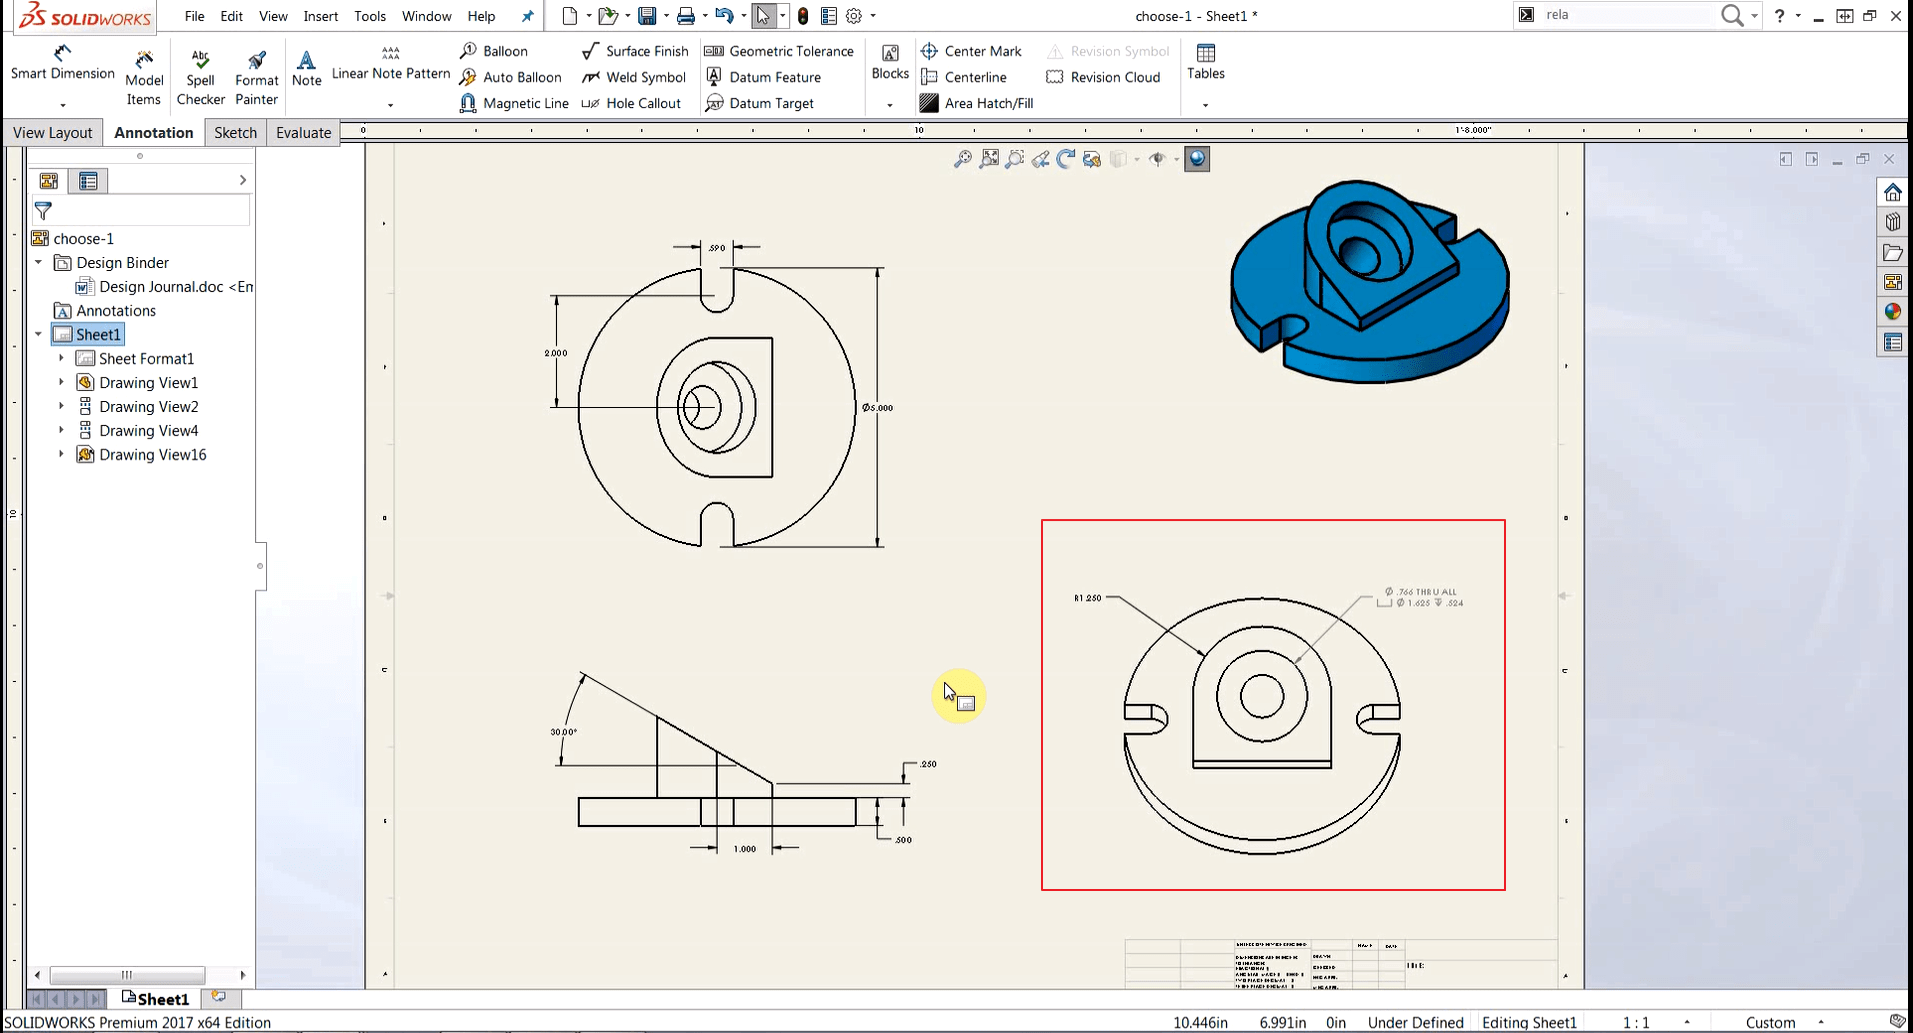 SOLIDWORKS: How to Get a Non-Standard Drawing View